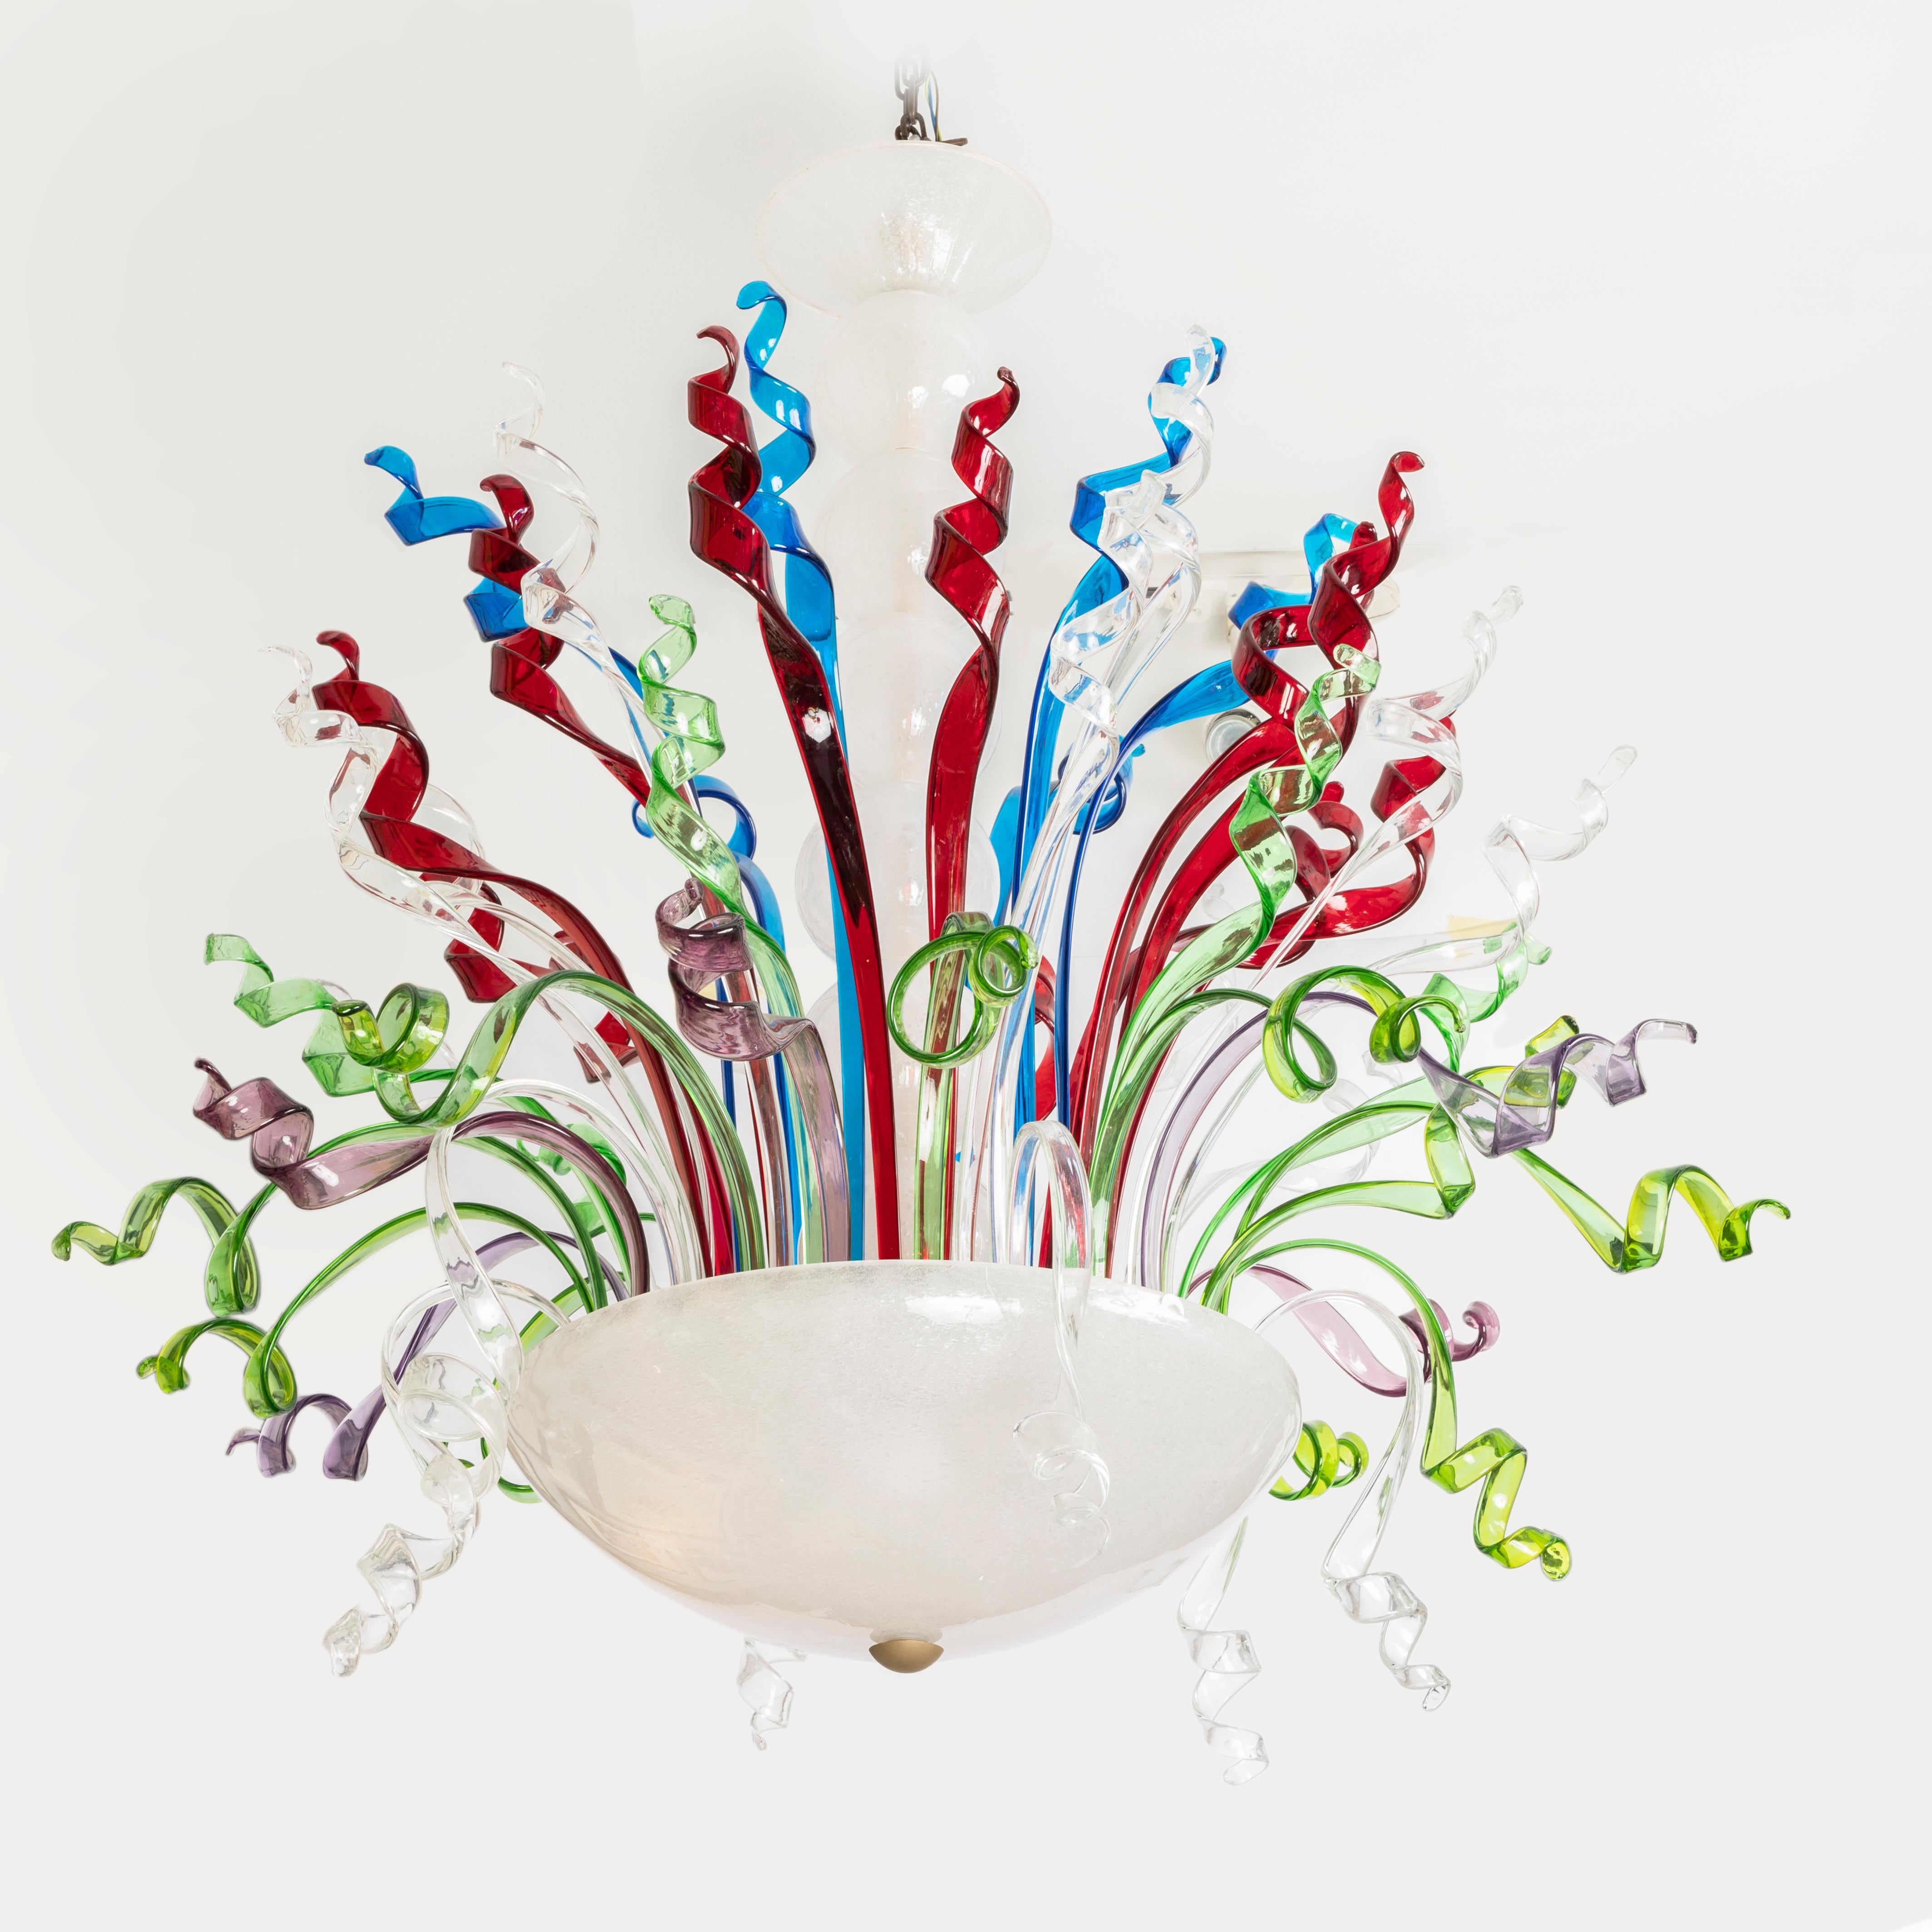 Pauly and C°, Murano fireworks chandelier, blown glass, multi-coloured

Multi-coloured blown and bent glass chandelier designed like a Firework or Fountain by Pauly & C°, Murano, Italy.

The basket (or bowl) and the balls of the stem forming the